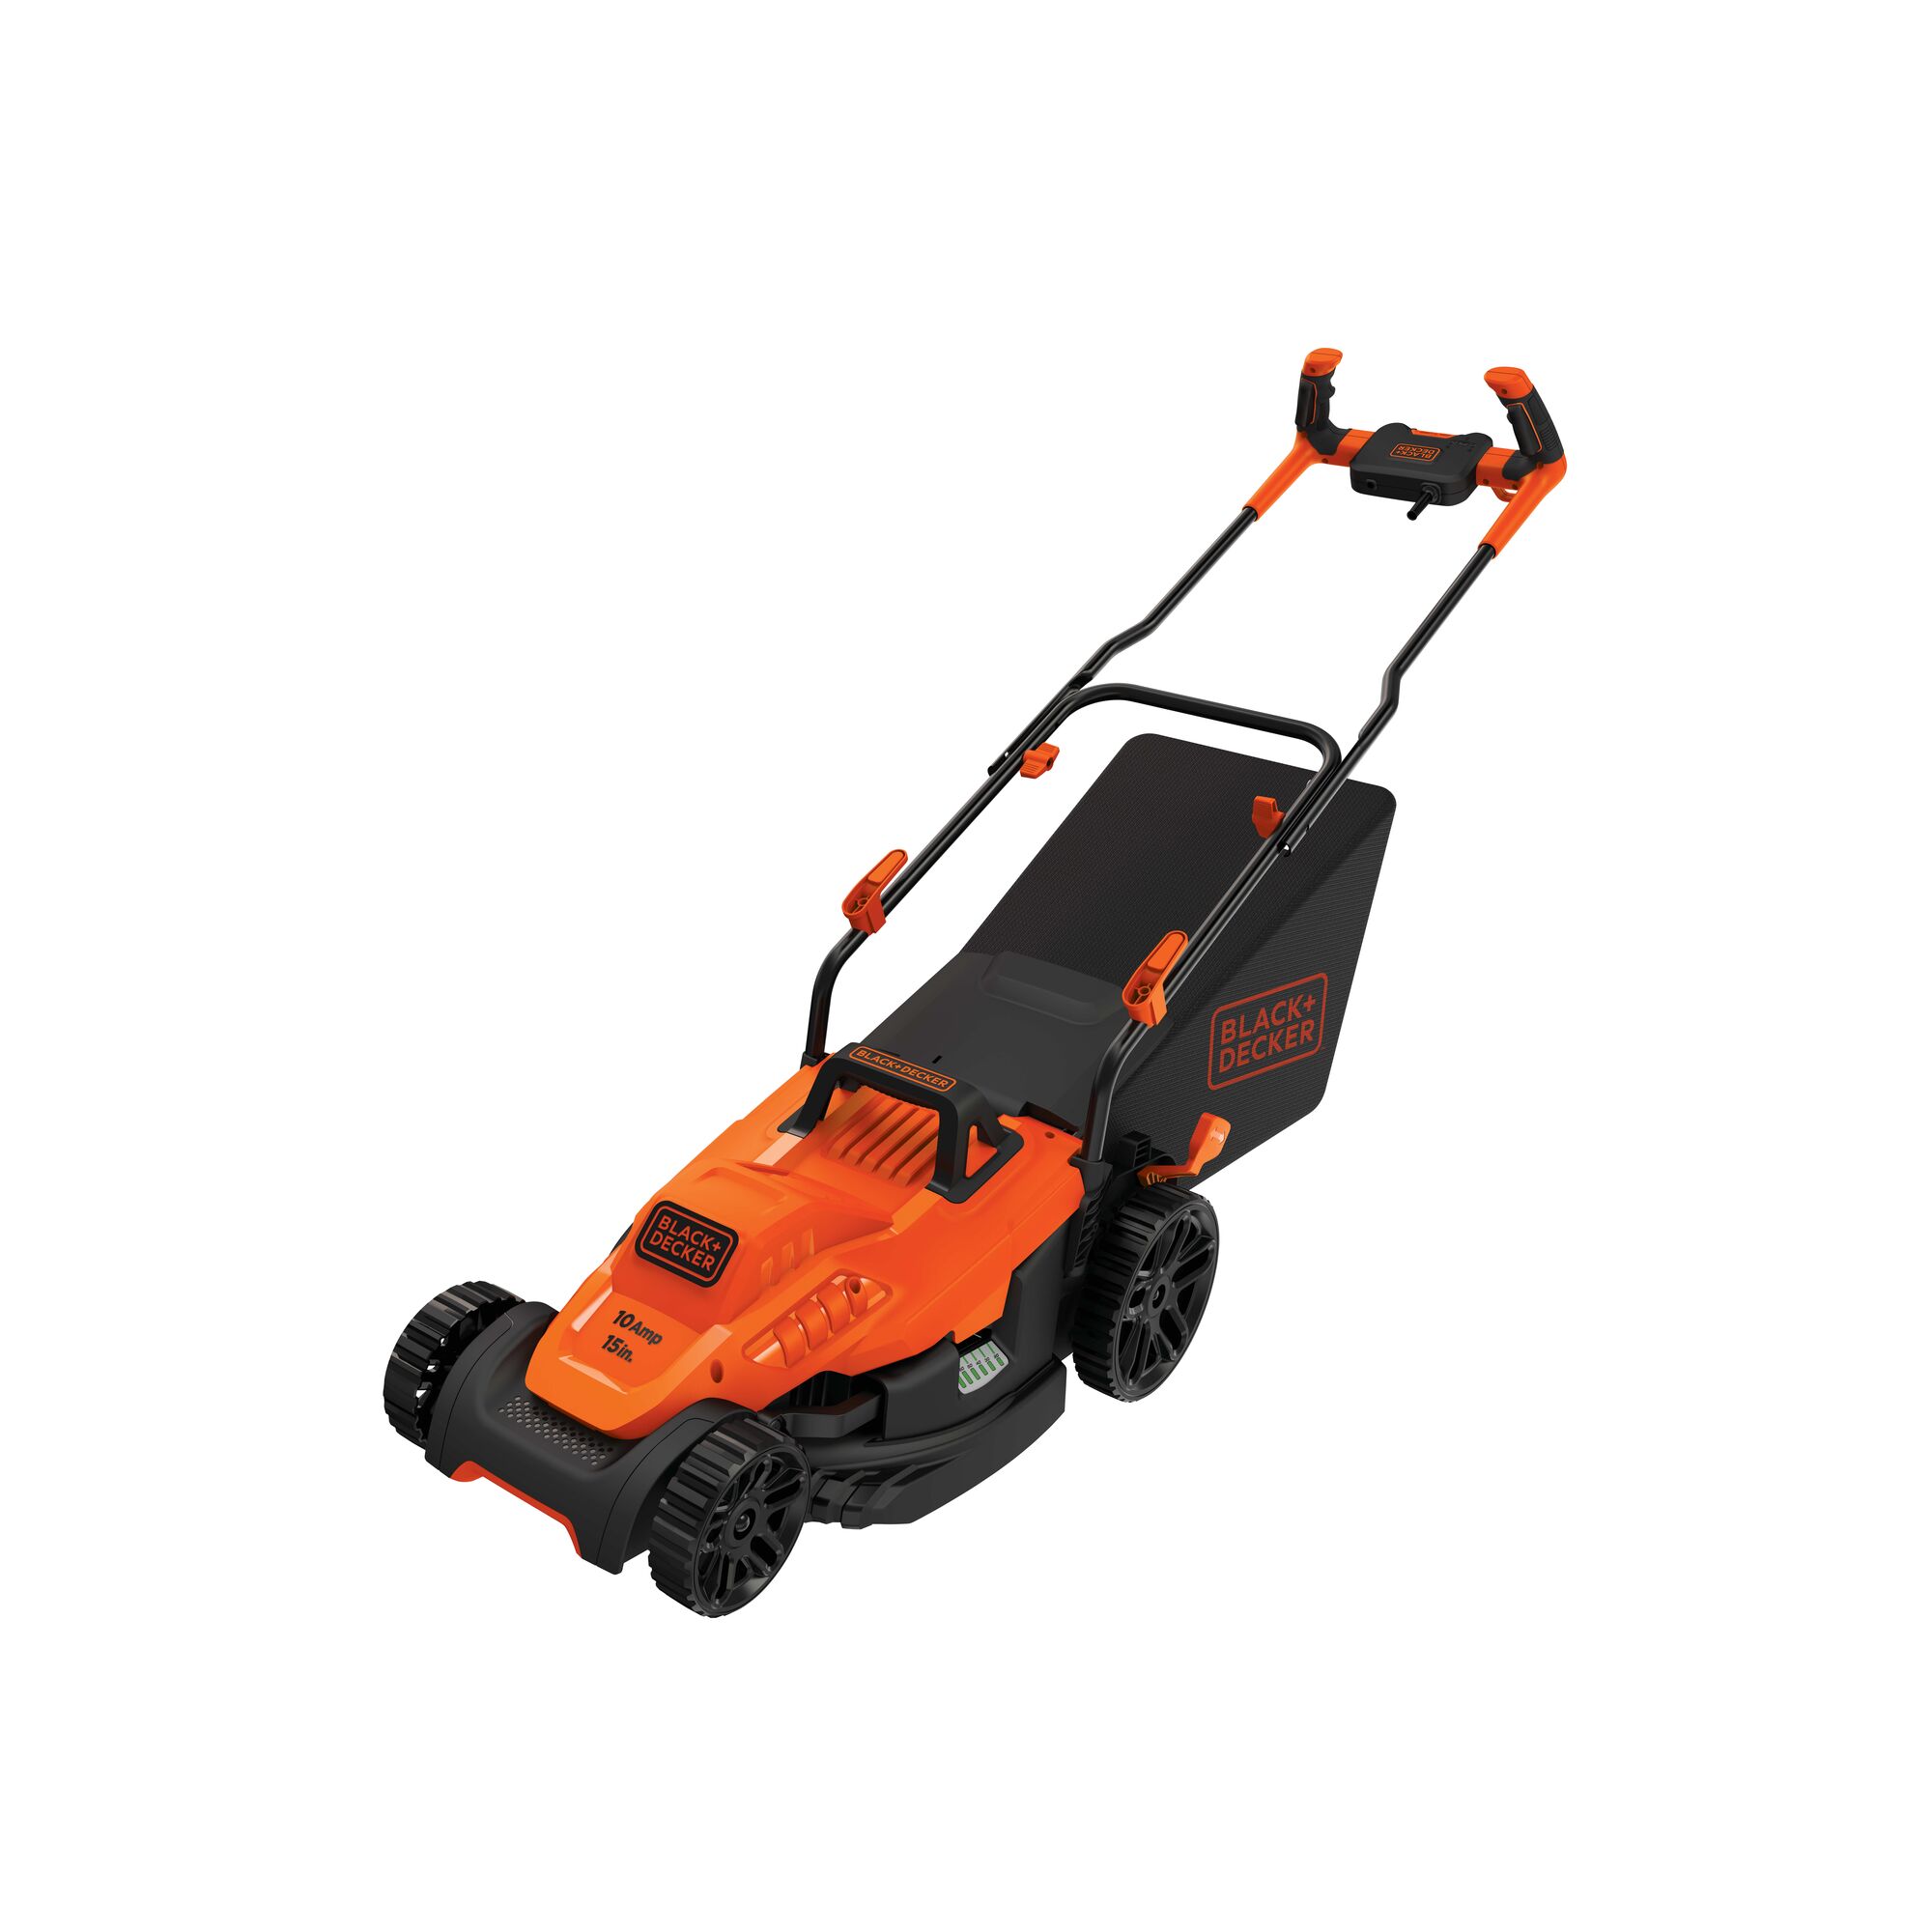 Profile of 10 Ampere 15 inch electric lawn mower with comfort grip handle.